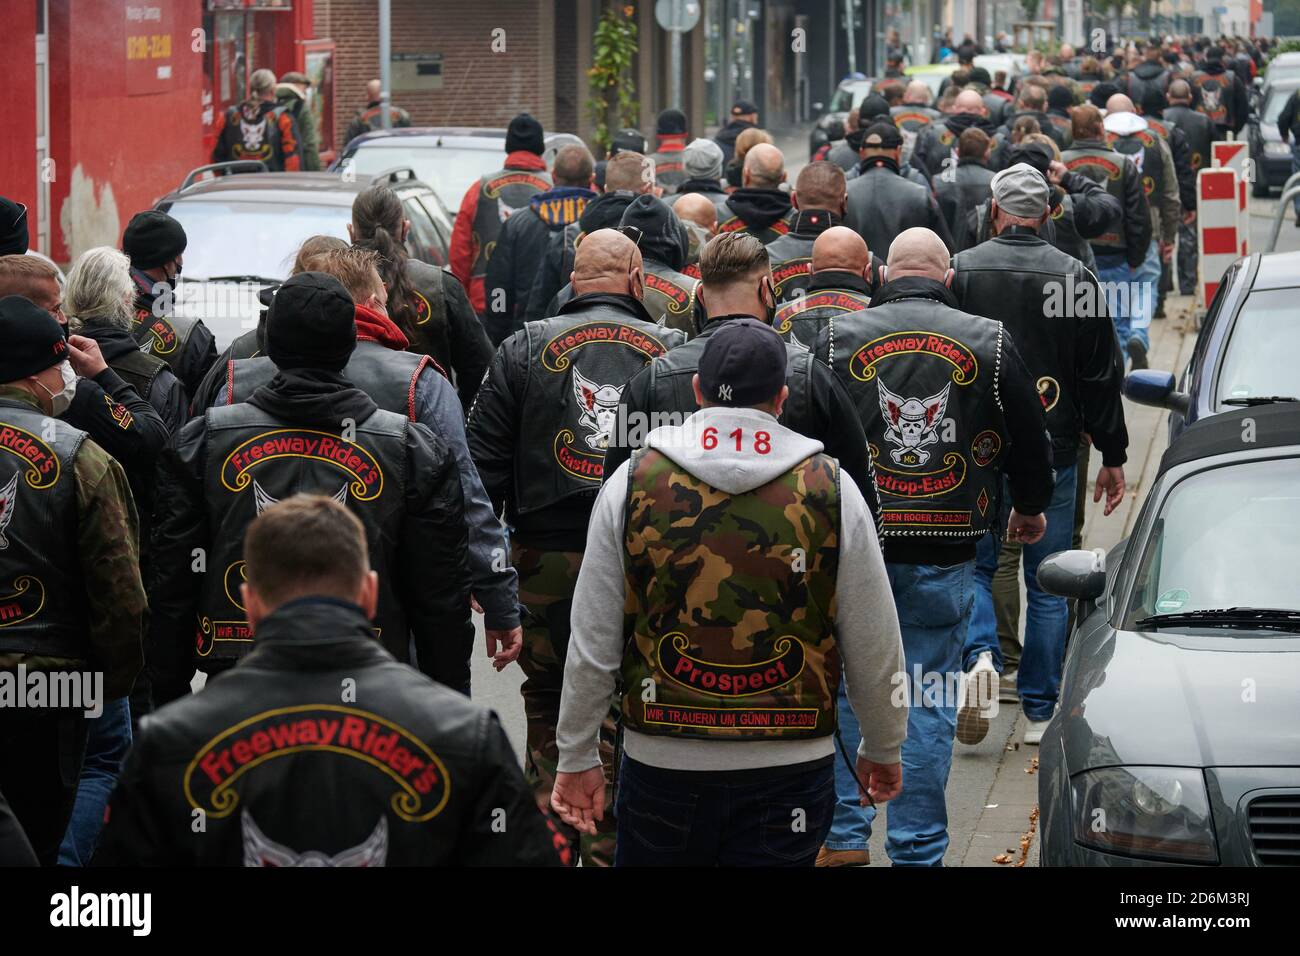 Gelsenkirchen, Germany. 18th Oct, 2020. Participants parade through the city in a funeral march in memory of a member of the rocker group 'Freeway Riders' who was killed in 2018. After an argument in the rocker milieu, the member of the 'Freeway Riders' had been stabbed to death on the open street on October 13, 2018. Credit: Henning Kaiser/dpa/Alamy Live News Stock Photo